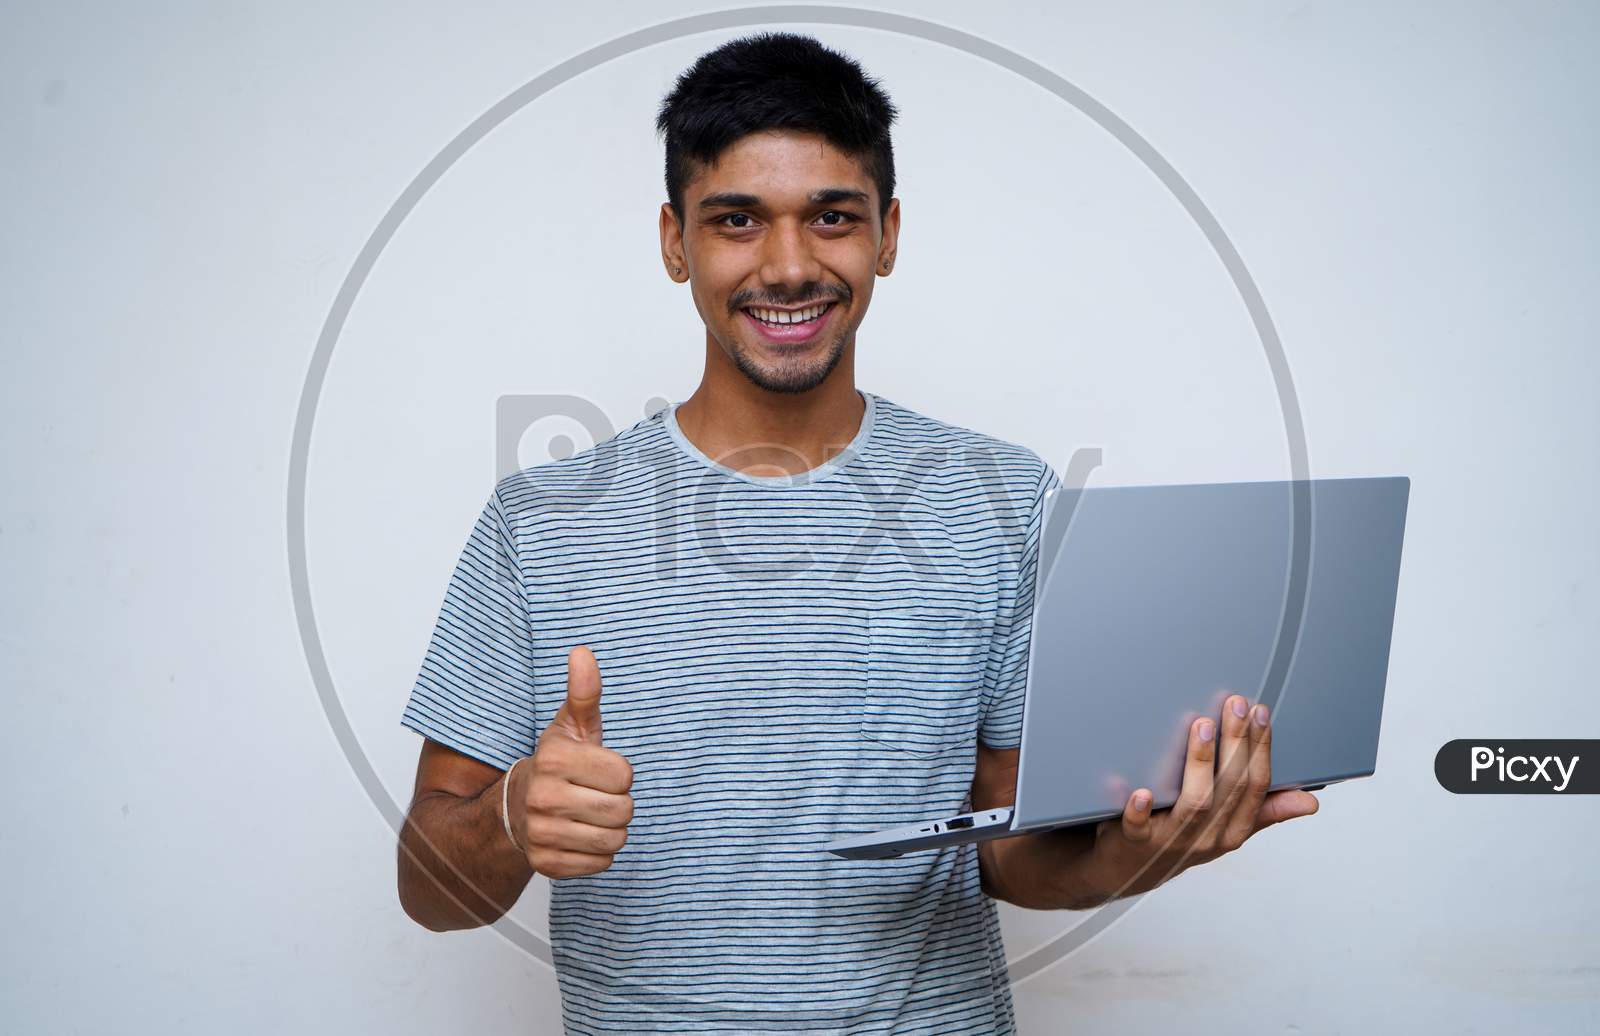 `Young Indian Handsome Boy Showing Thumbs Up And Smiling While Looking Into The Camera, Holding Laptop In His Other Hand.